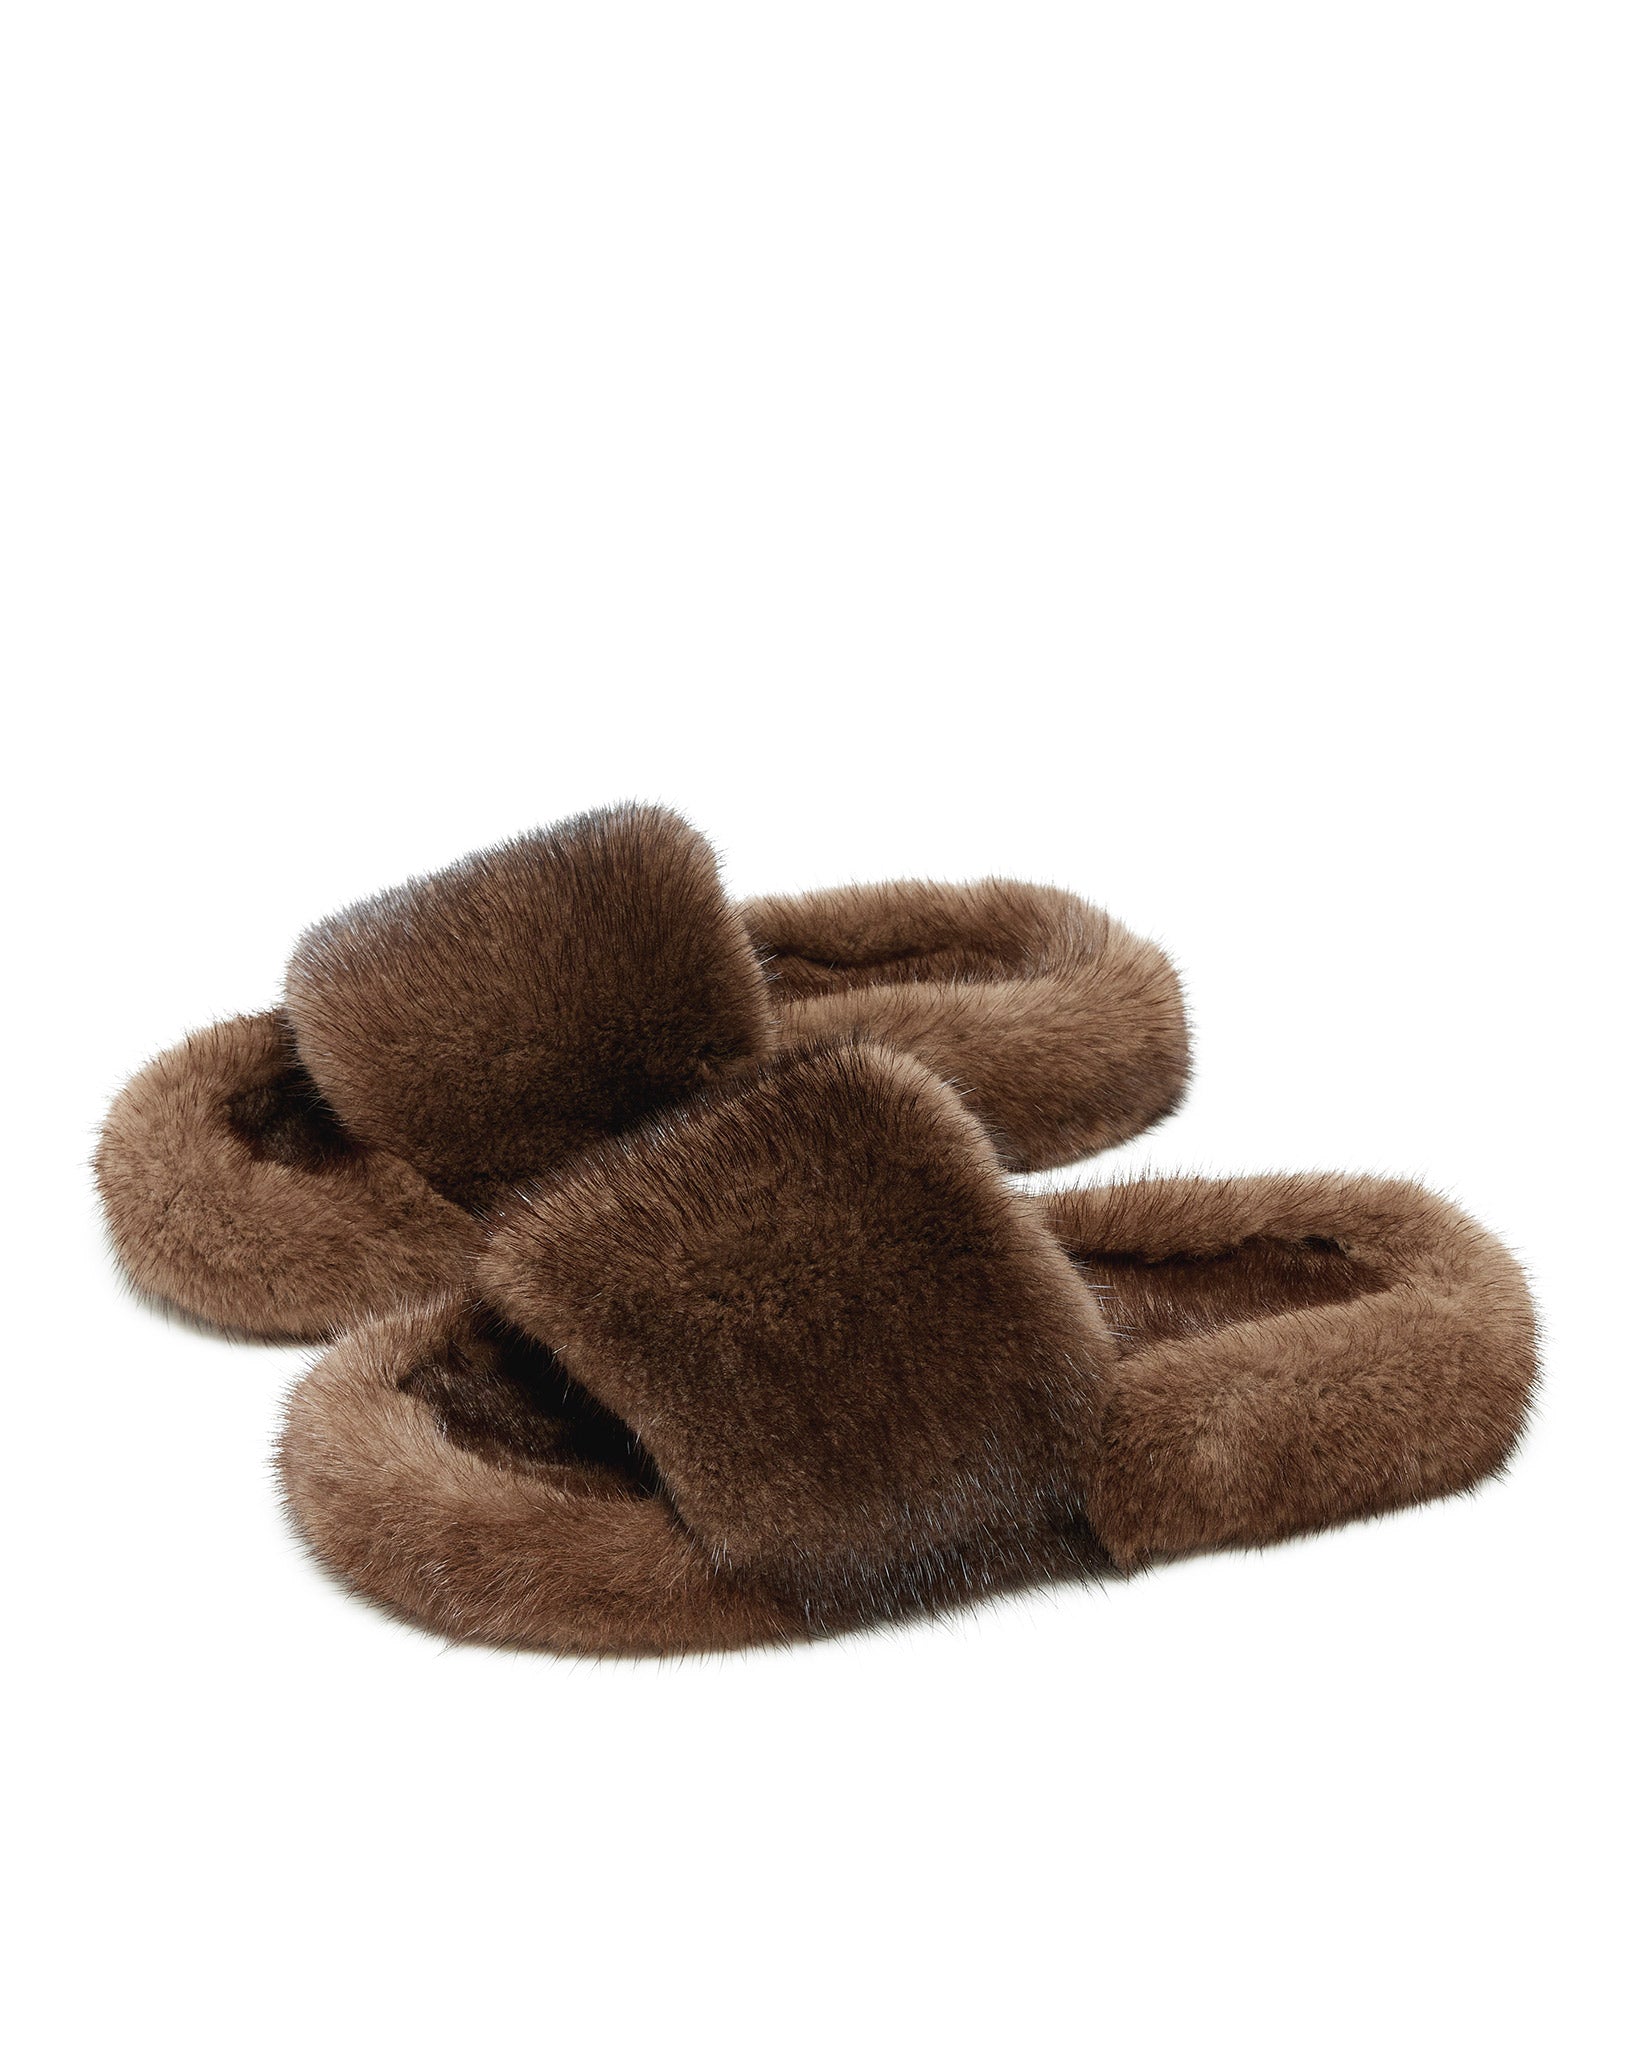 Lithunium on Twitter  Louis vuitton slippers, Fluffy shoes, Louis